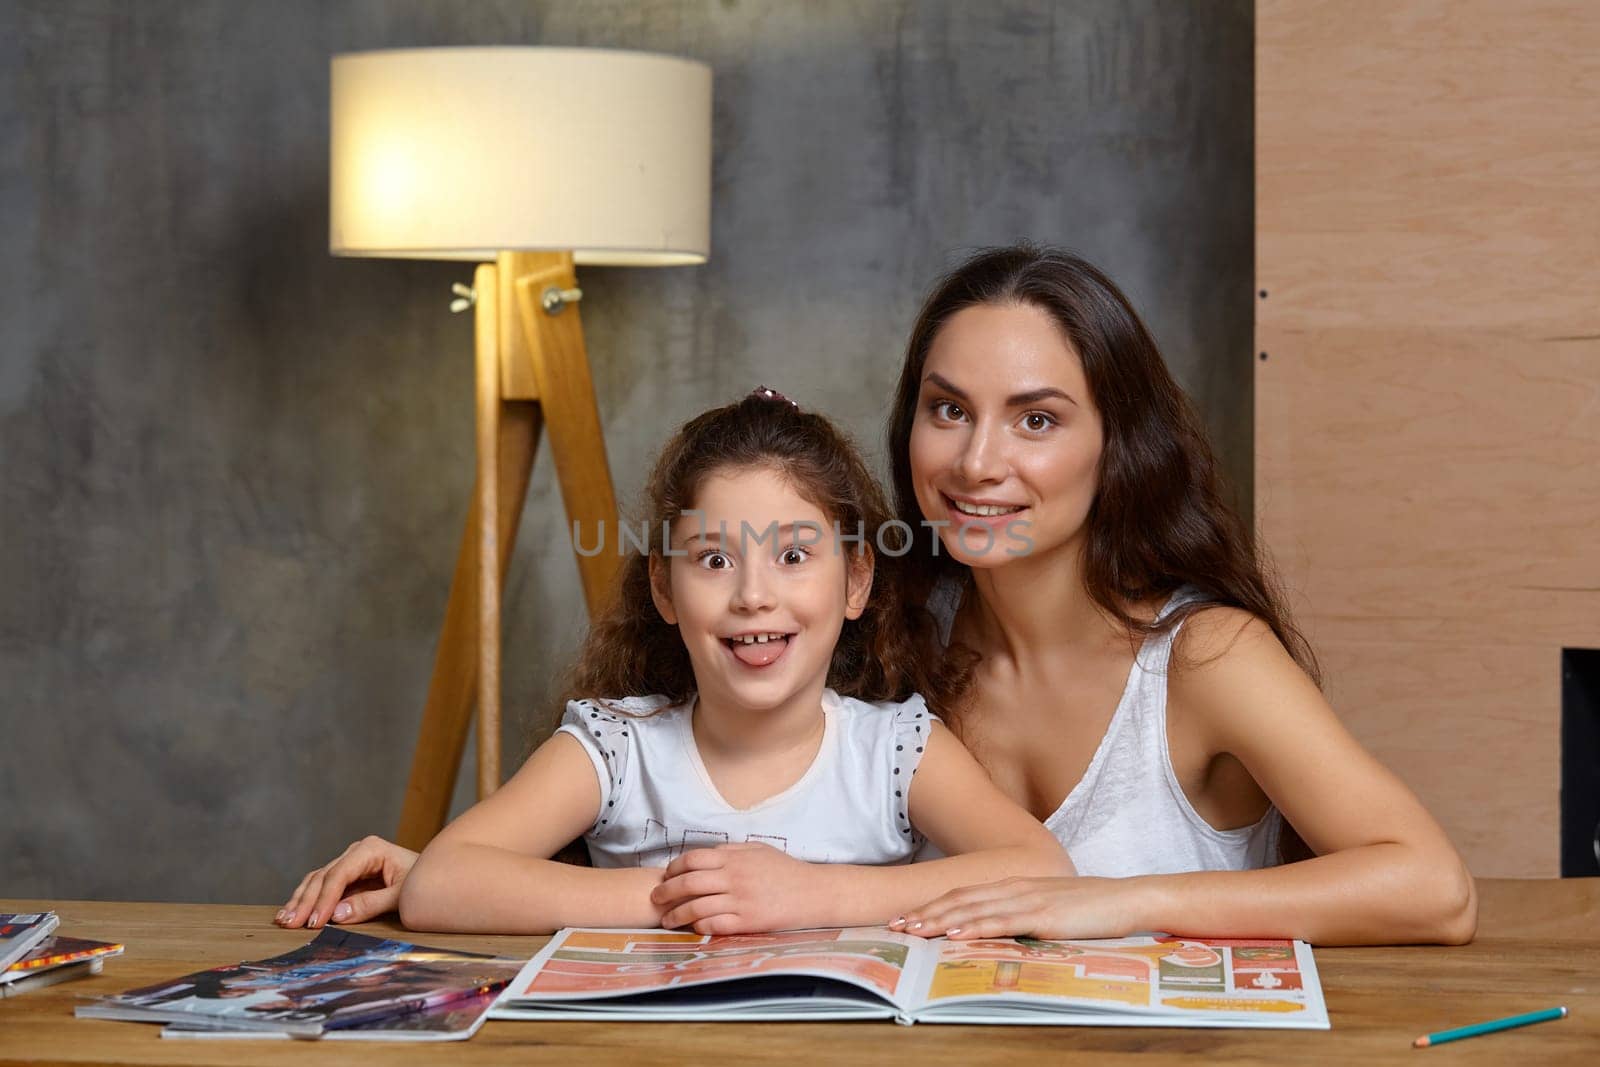 Portrait of a mother helping her small sweet and cute daughter to make her homework indoors. They are looking at the camera. Mom is smiling and her daughter is showing her tongue.